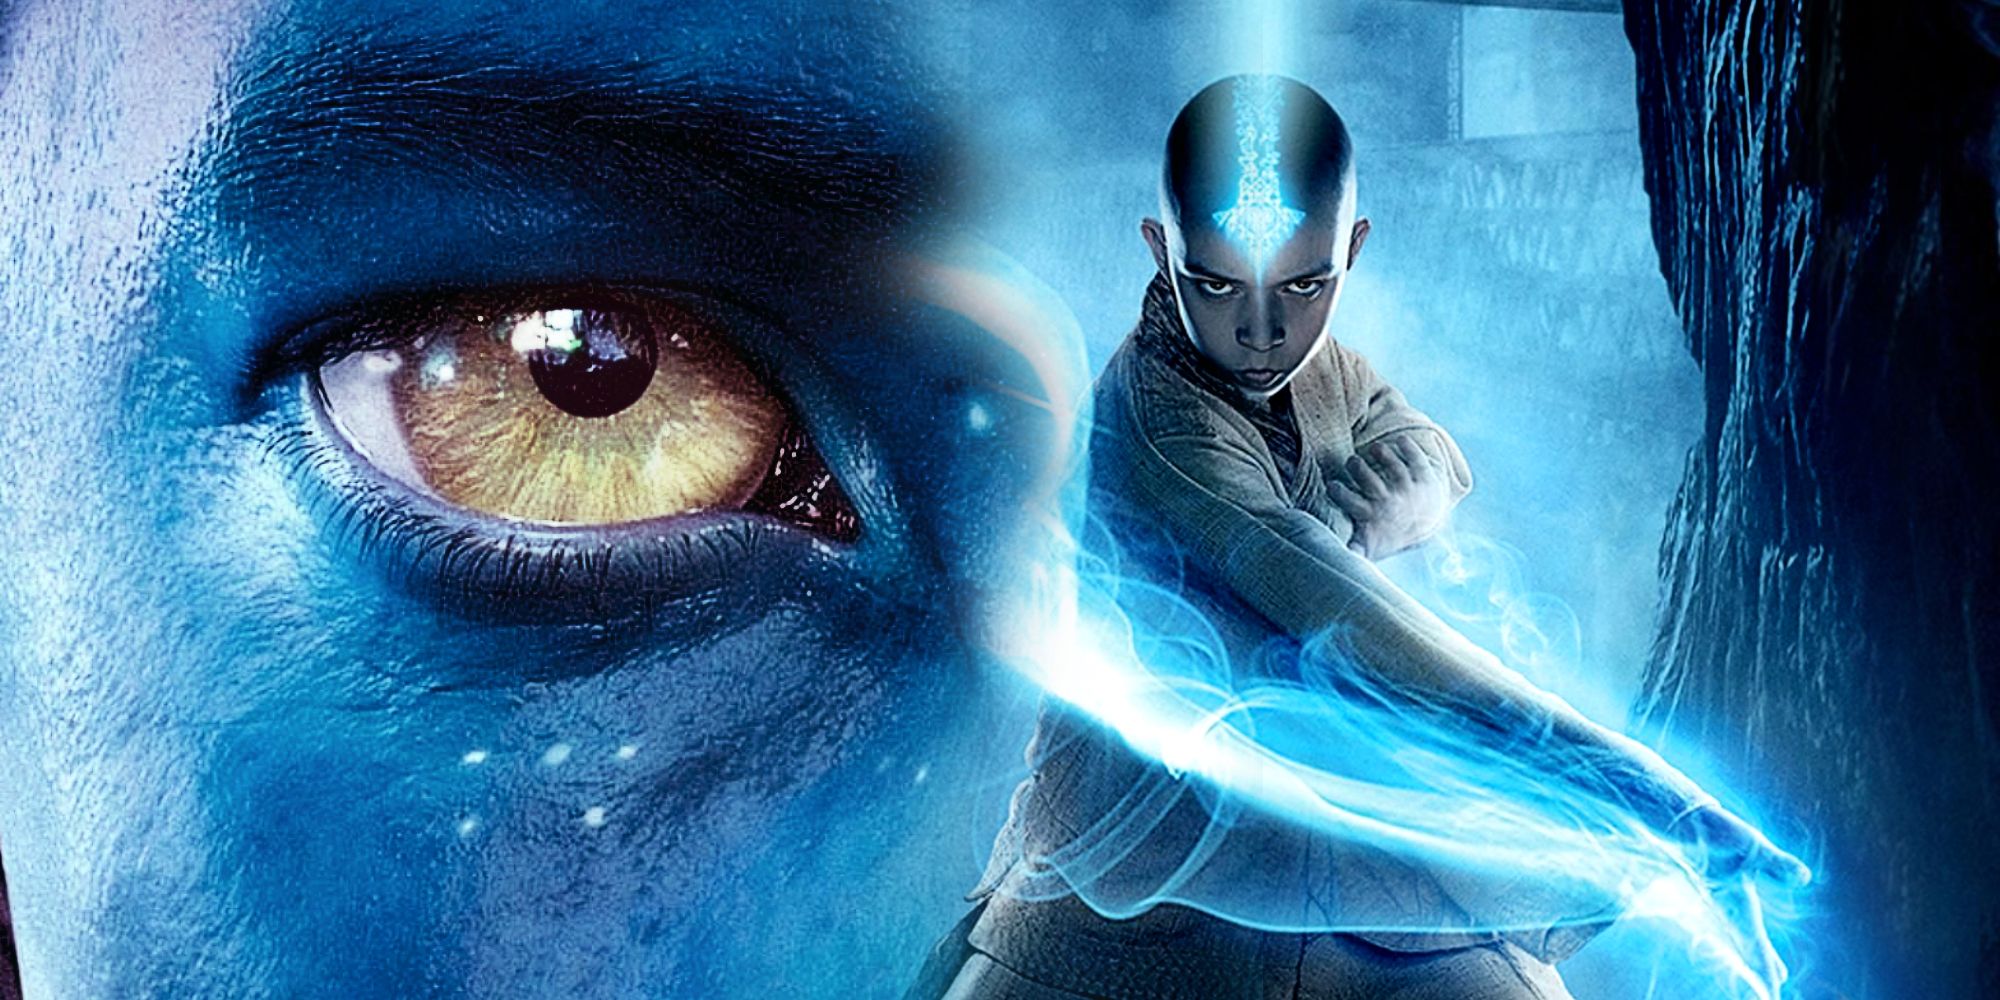 Jake Sully in Avatar and Aang in The Last Airbender